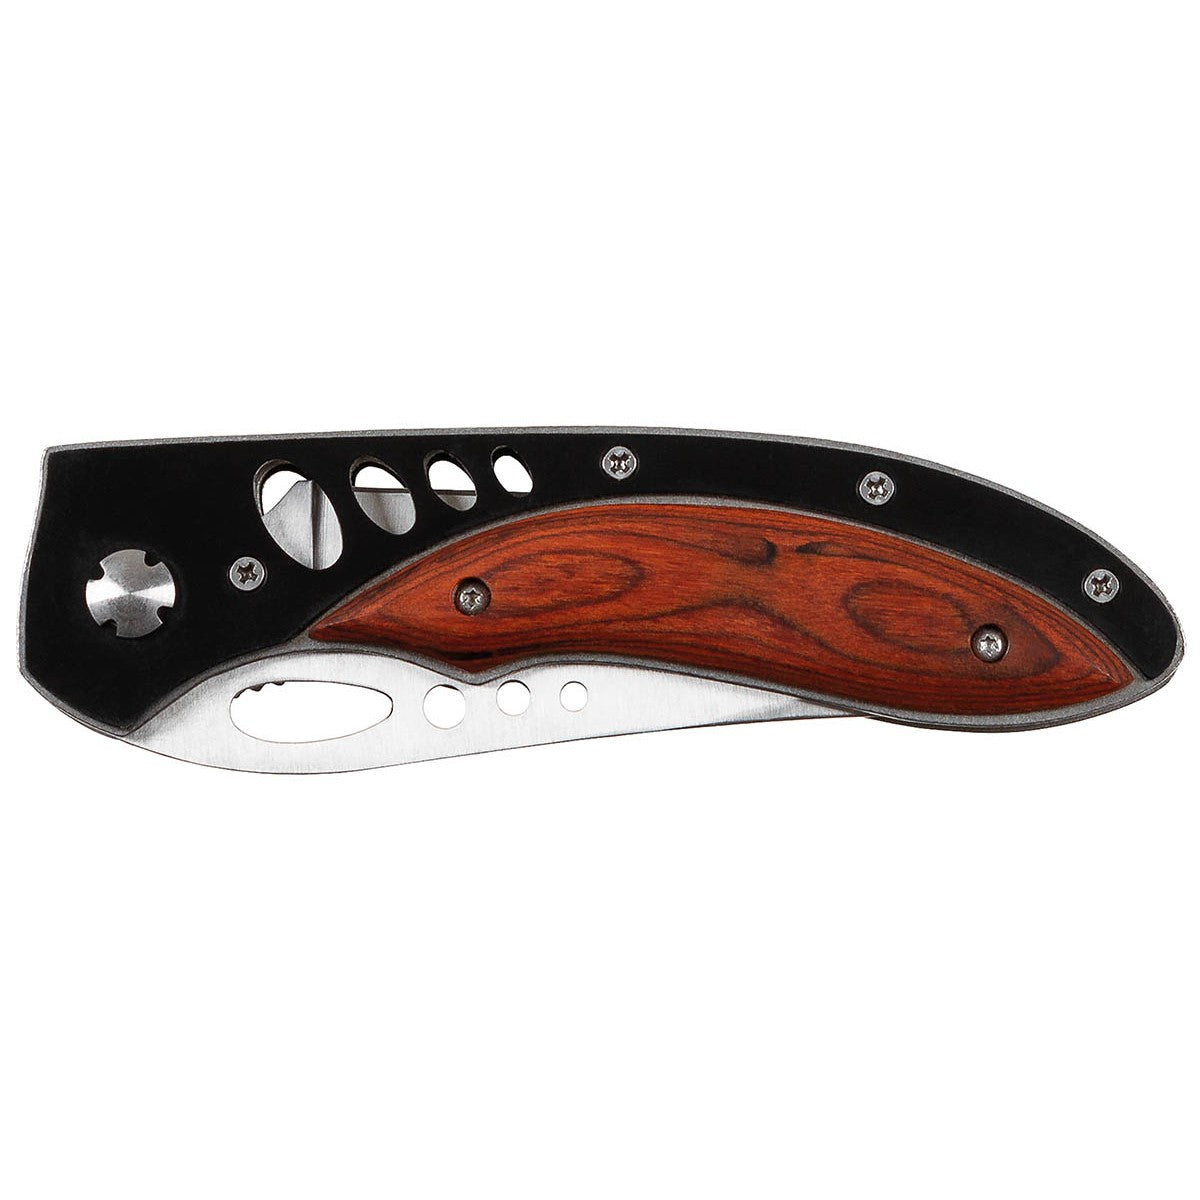 Folding knife, one-handed, handle with wood inlays